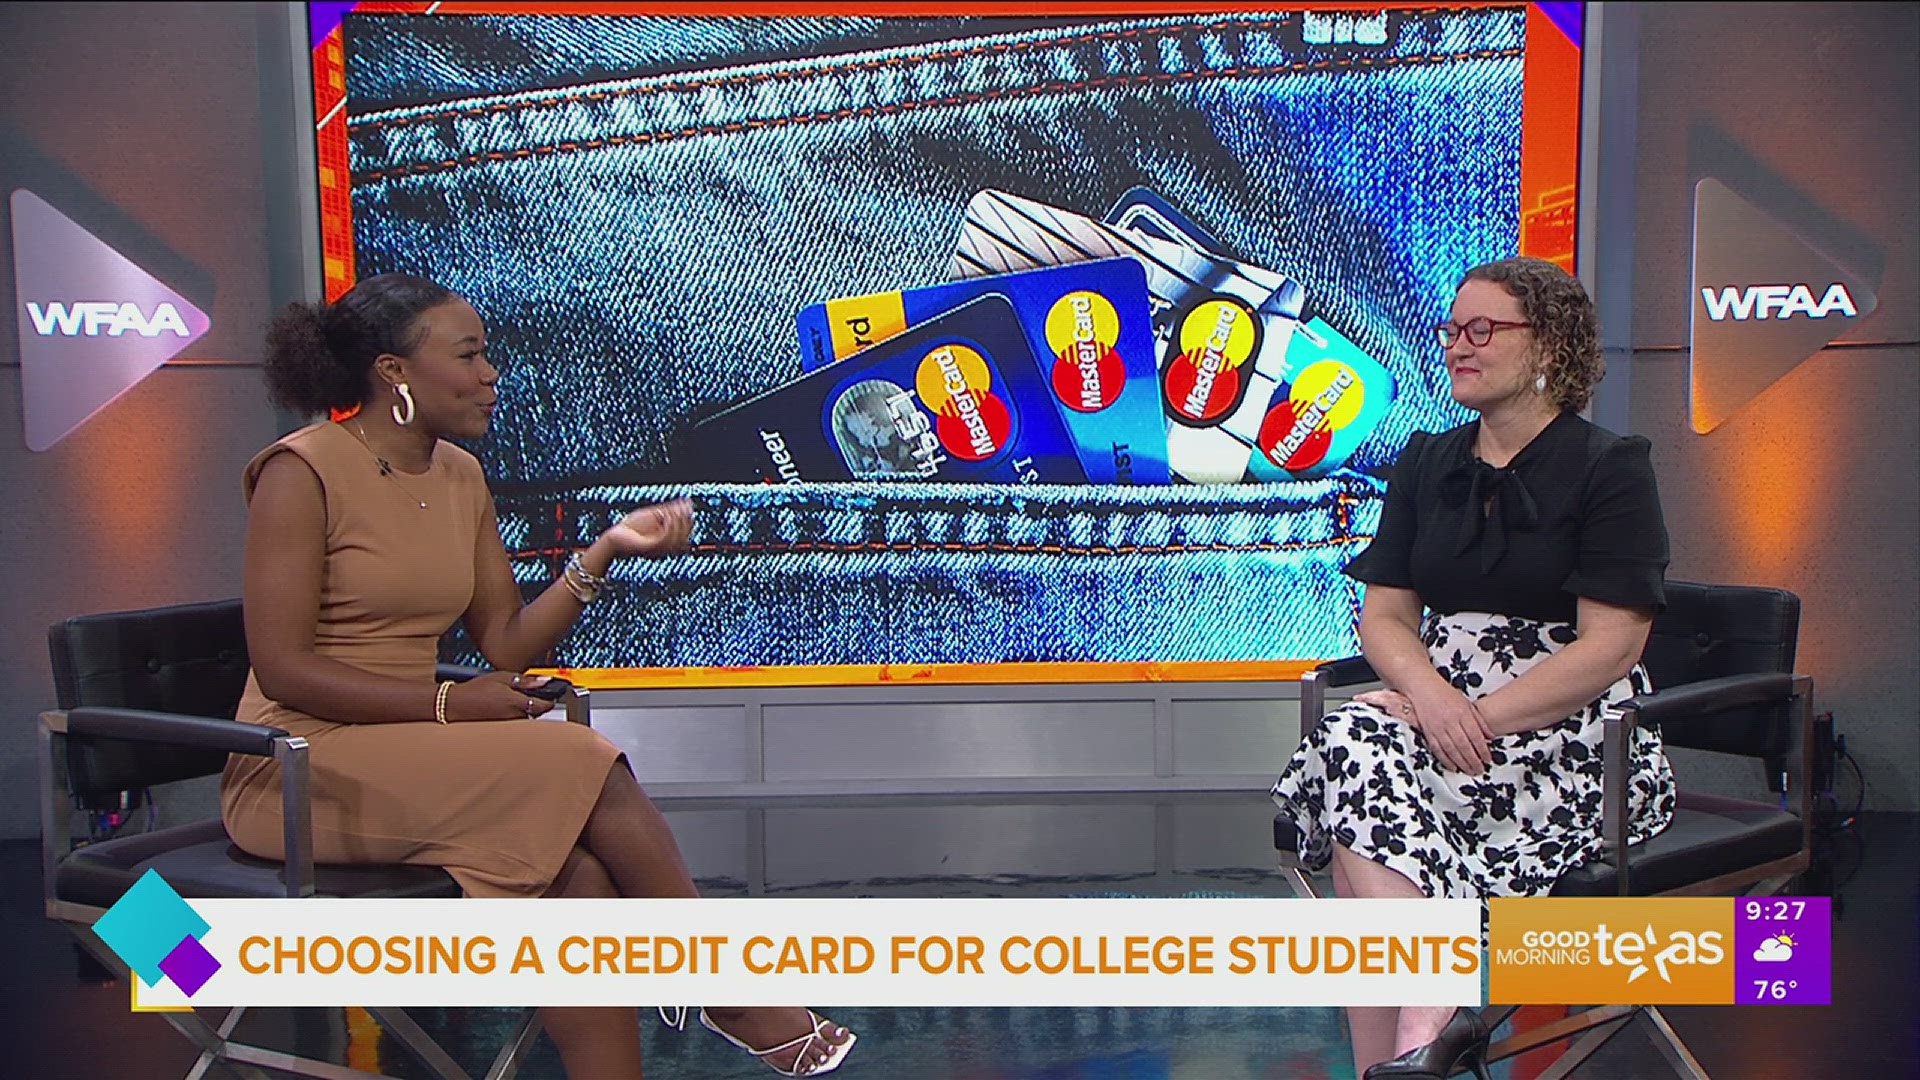 Katie Brewer with Your Richest Life Planning chats about finding the right credit card for college students. Go to yourrichestlifeplanning.com for more information.